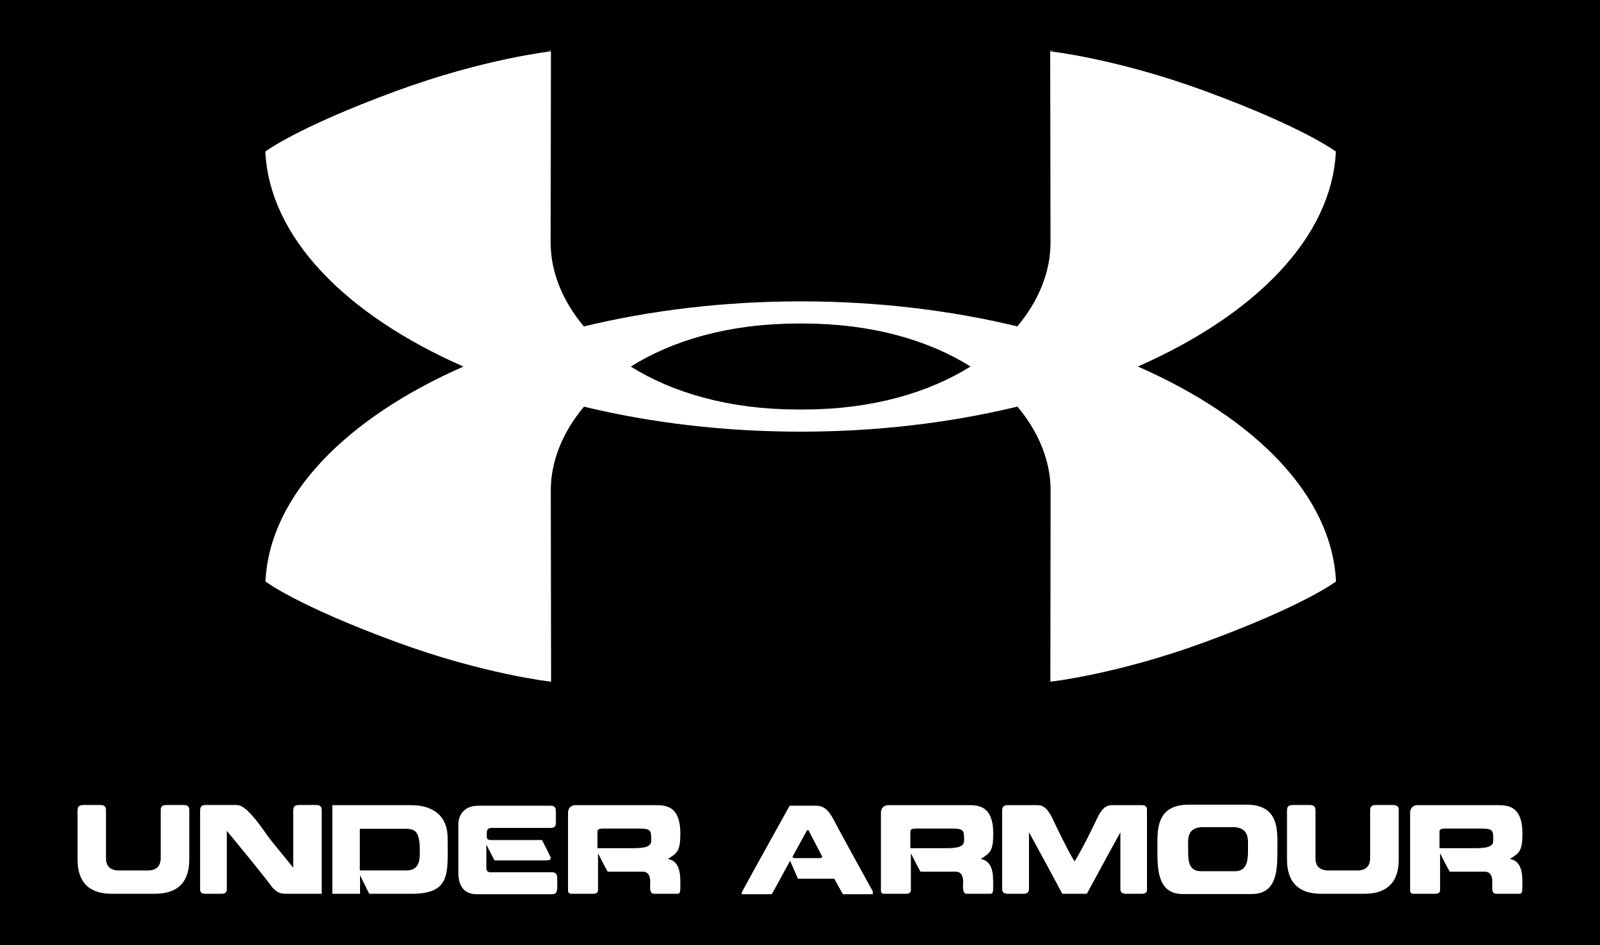 Under Armour logo and symbol, meaning 